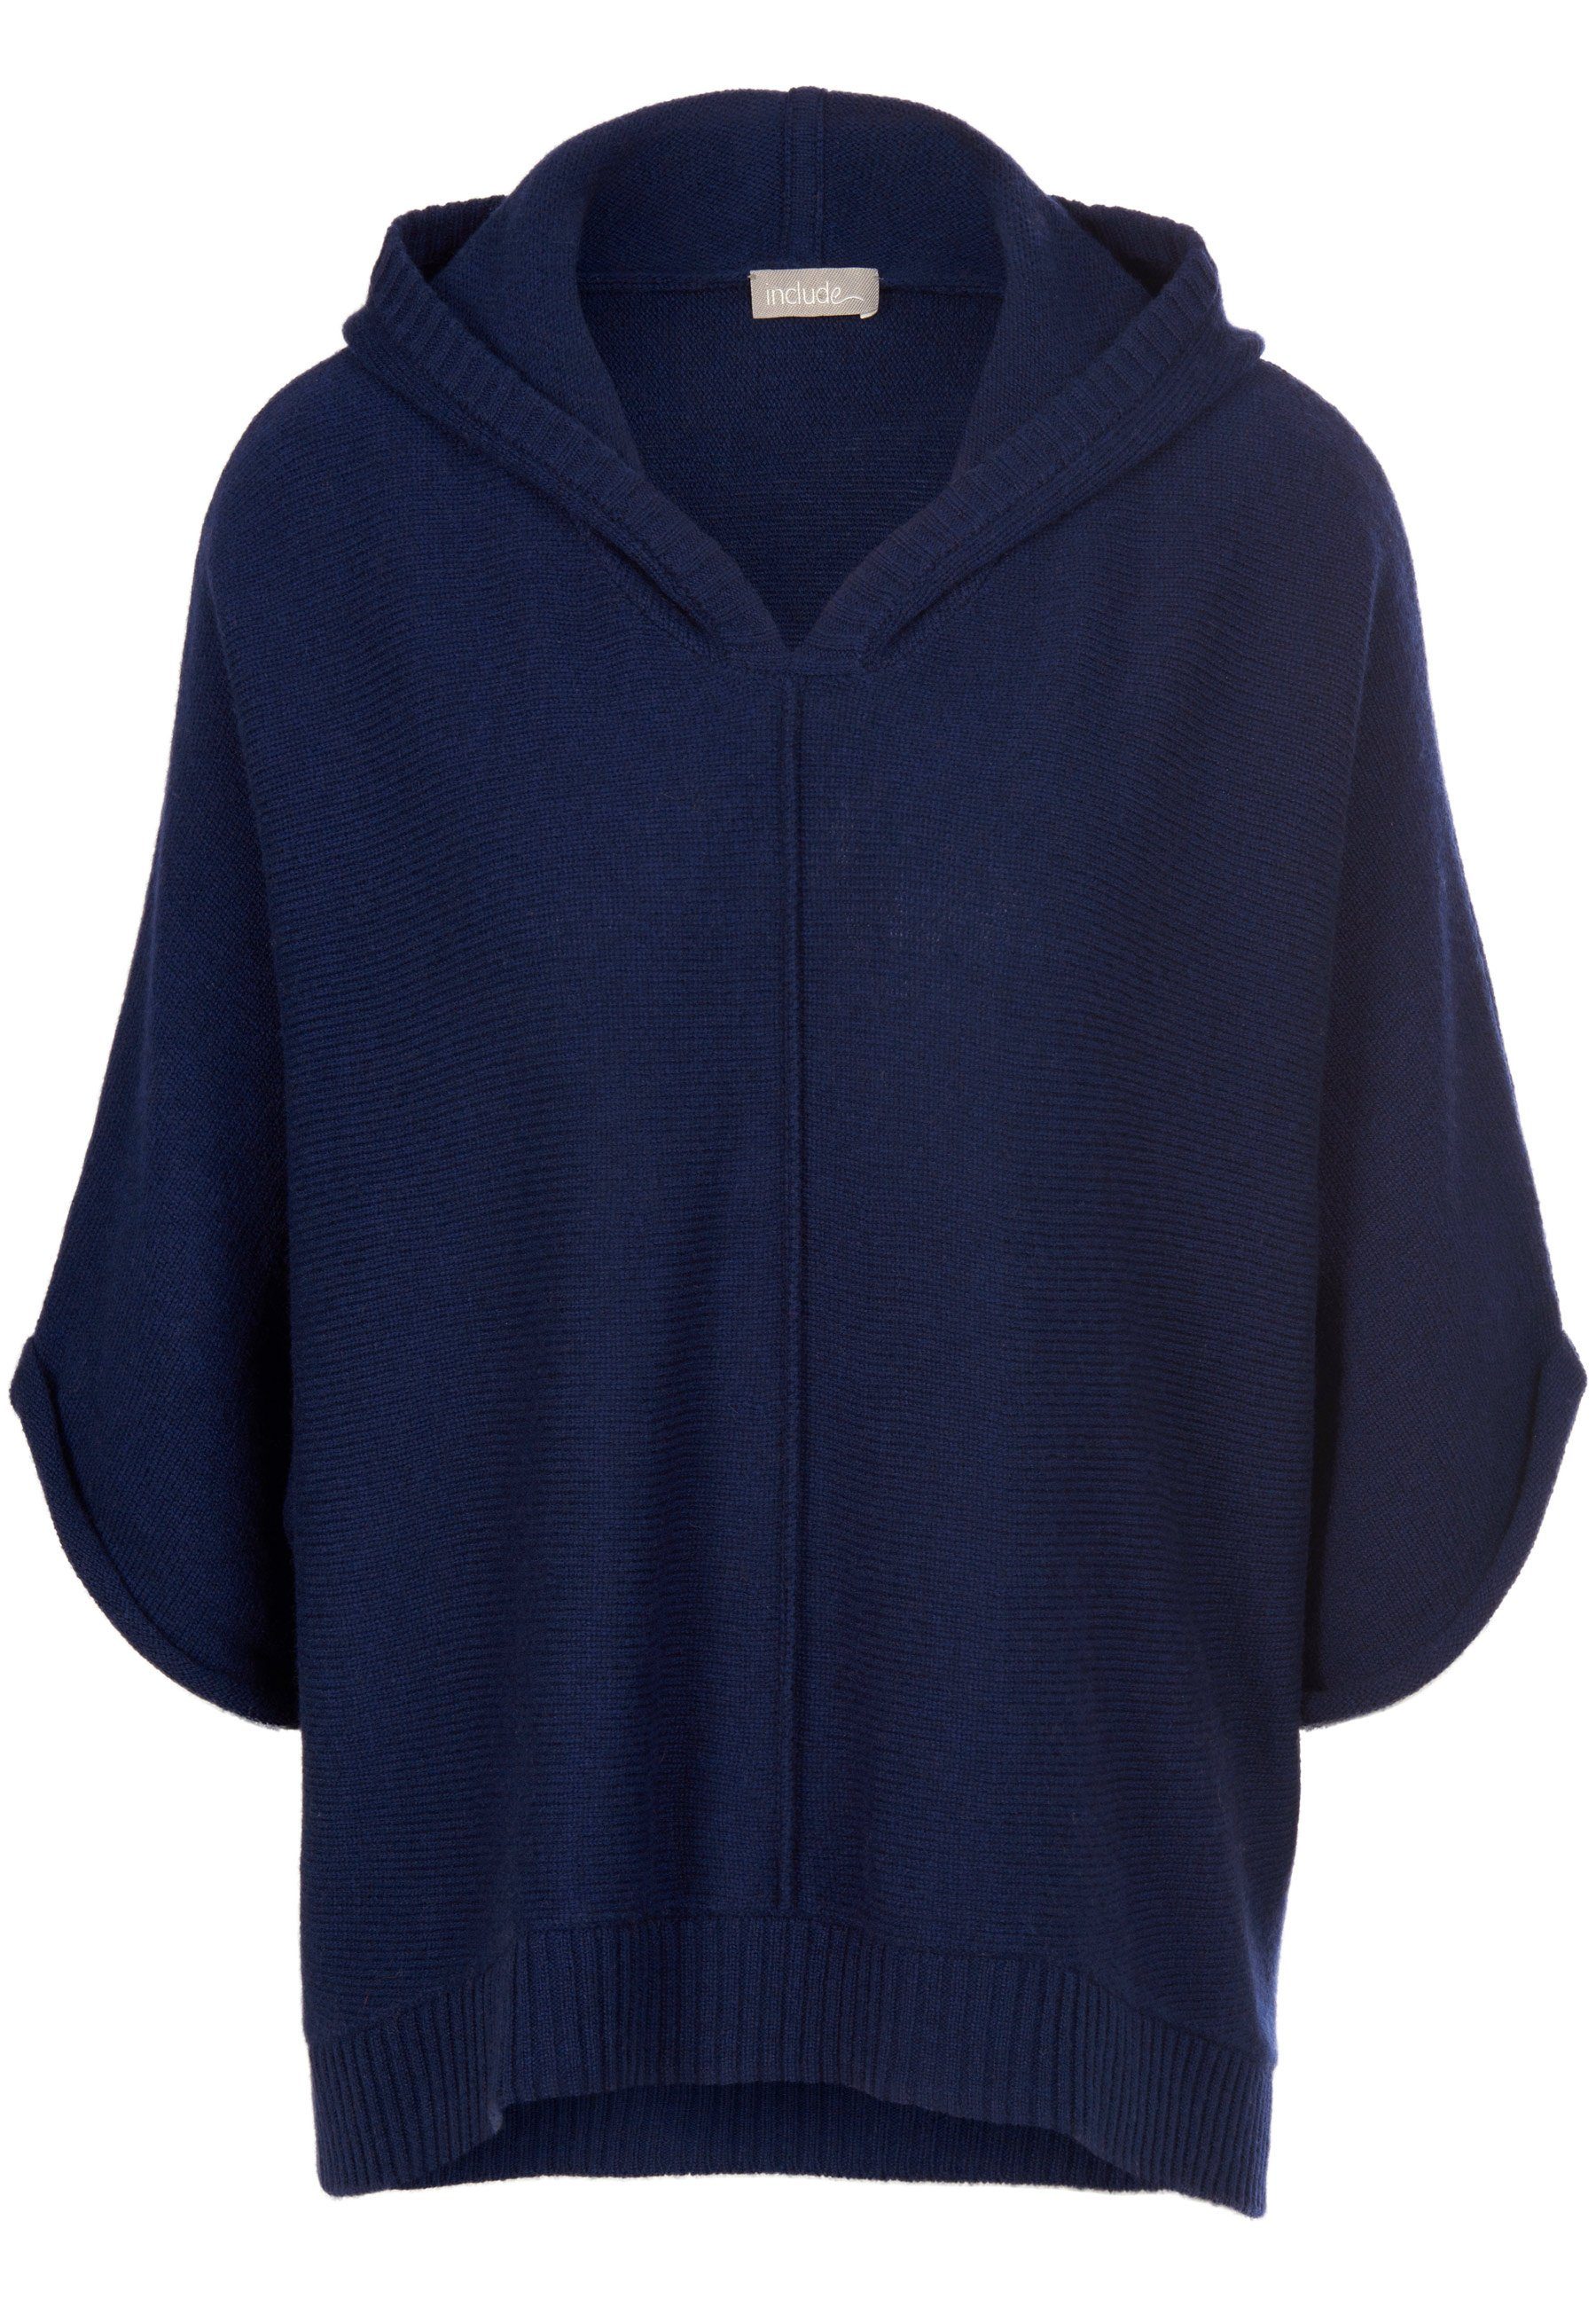 include Strickpullover New Wool navy